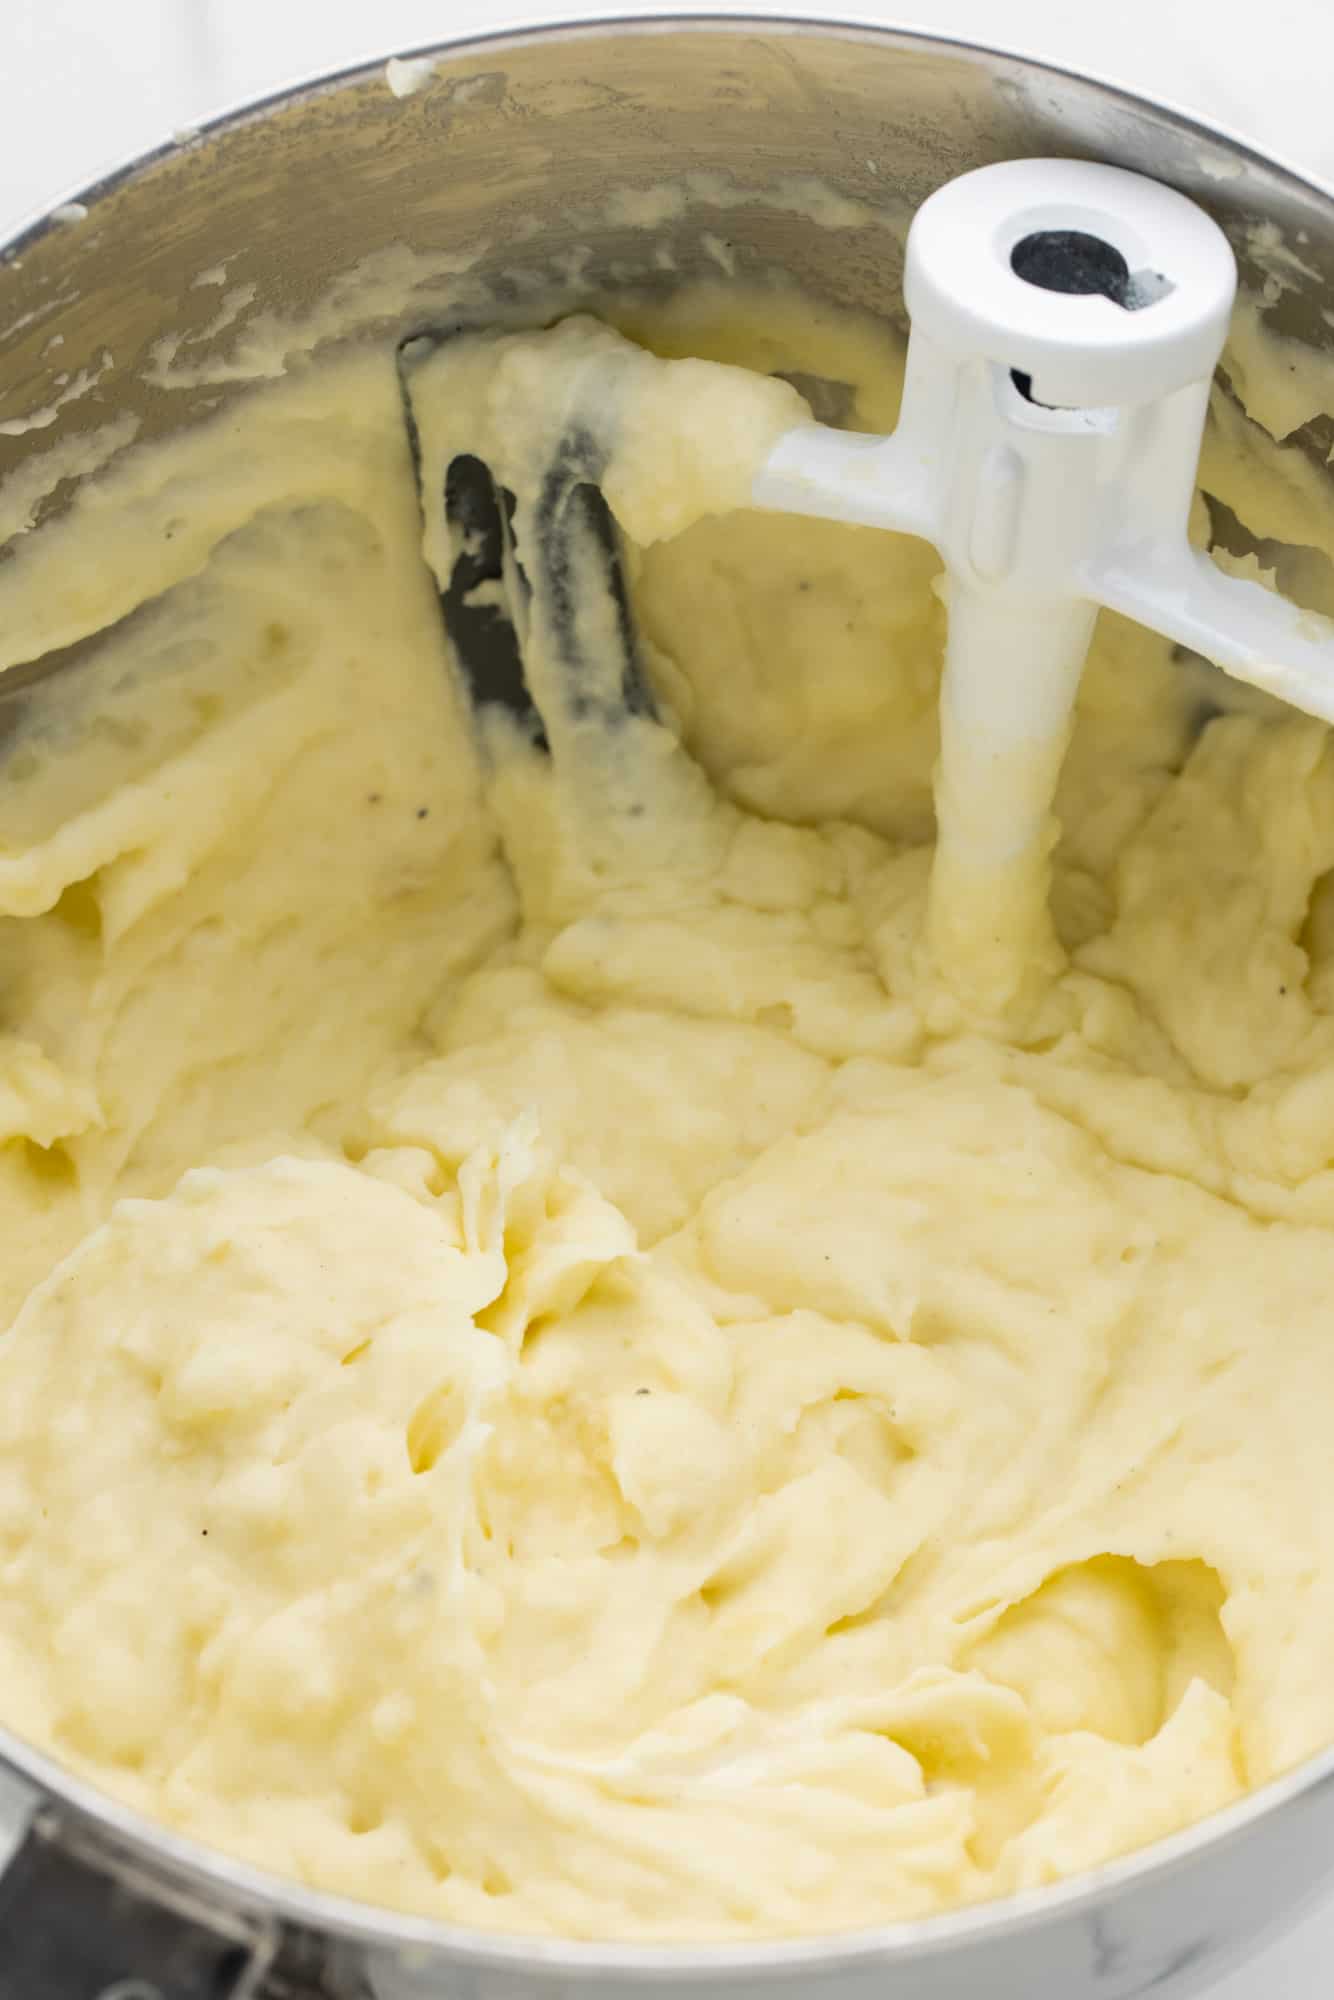 Whipped mashed potatoes in a mixer bowl with a paddle attachment